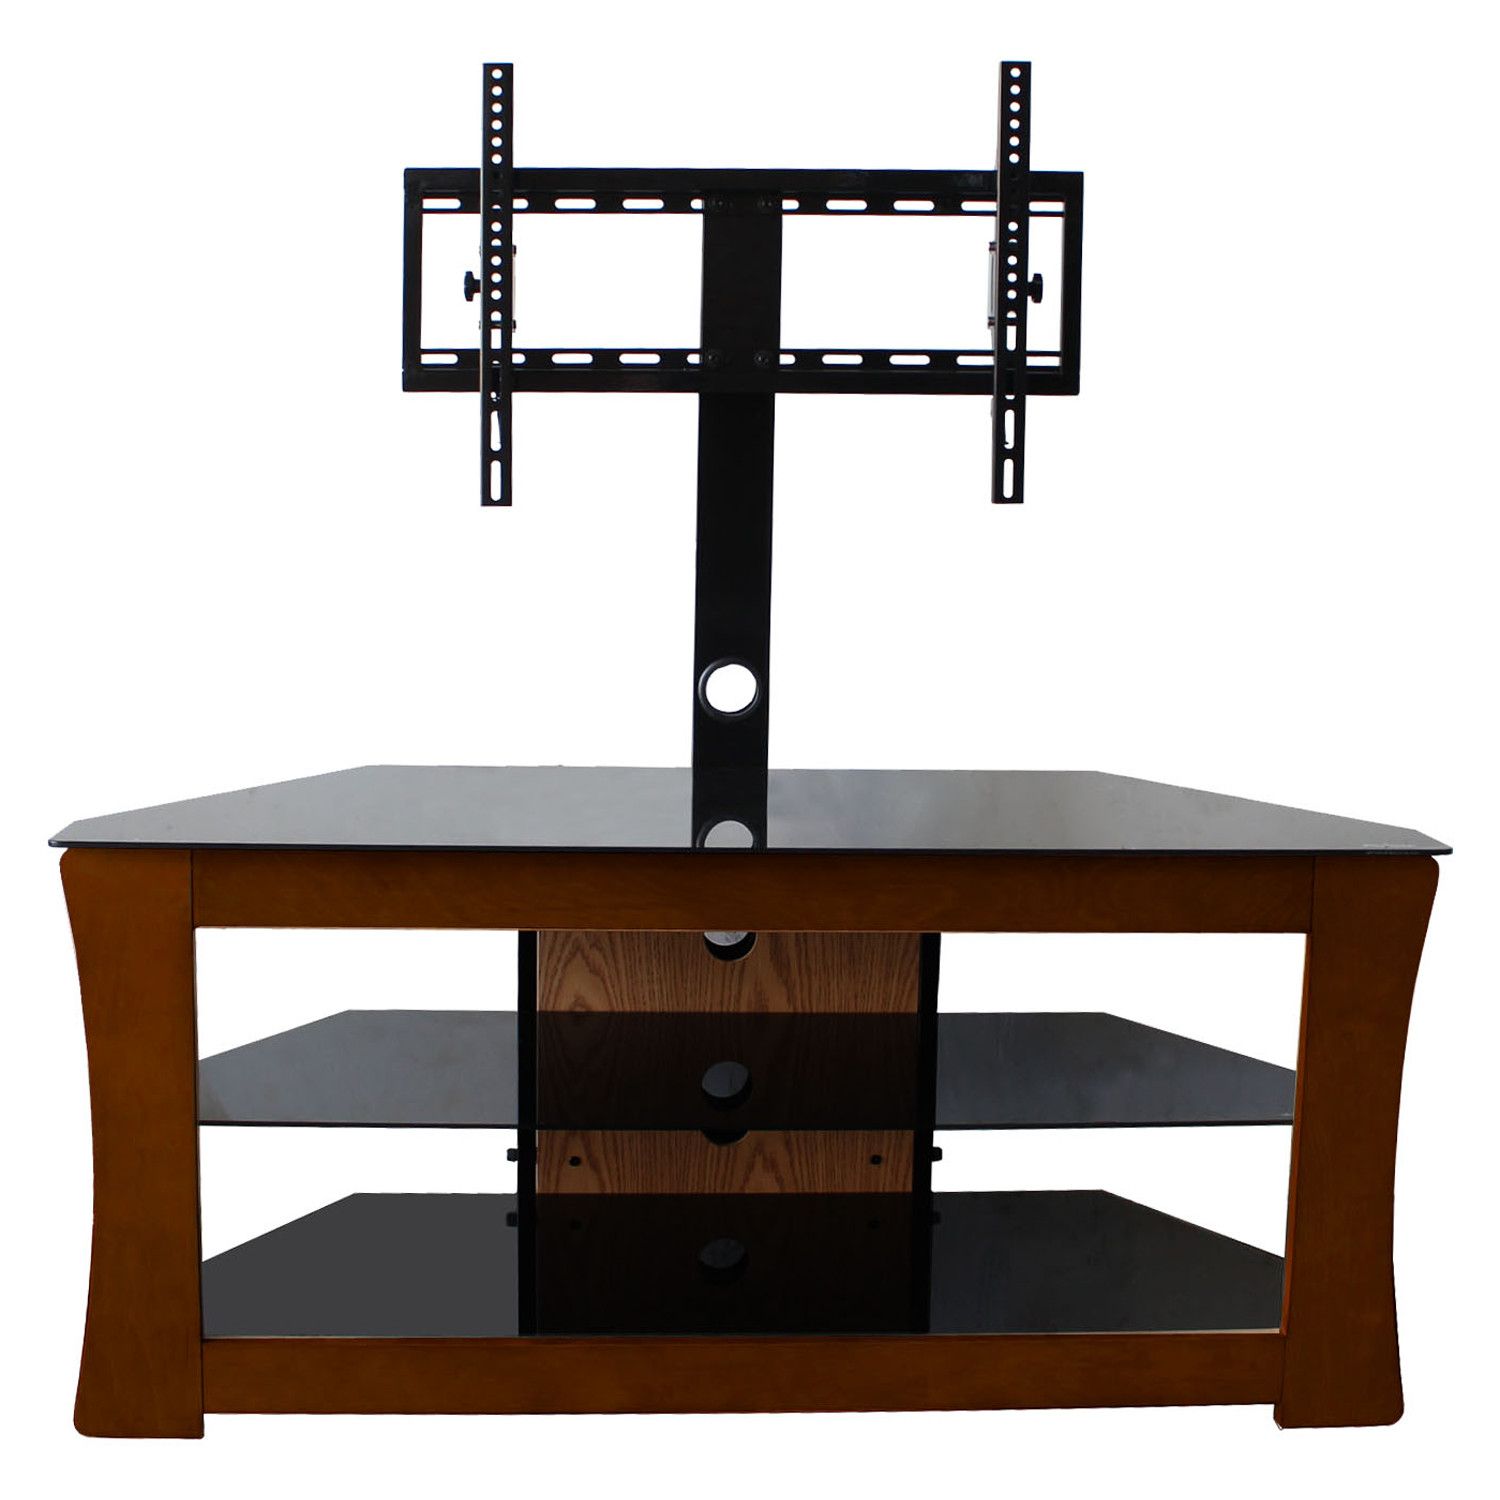 Cool Flat Screen Tv Stands With Mount | Homesfeed For Stand For Flat Screen (View 18 of 20)